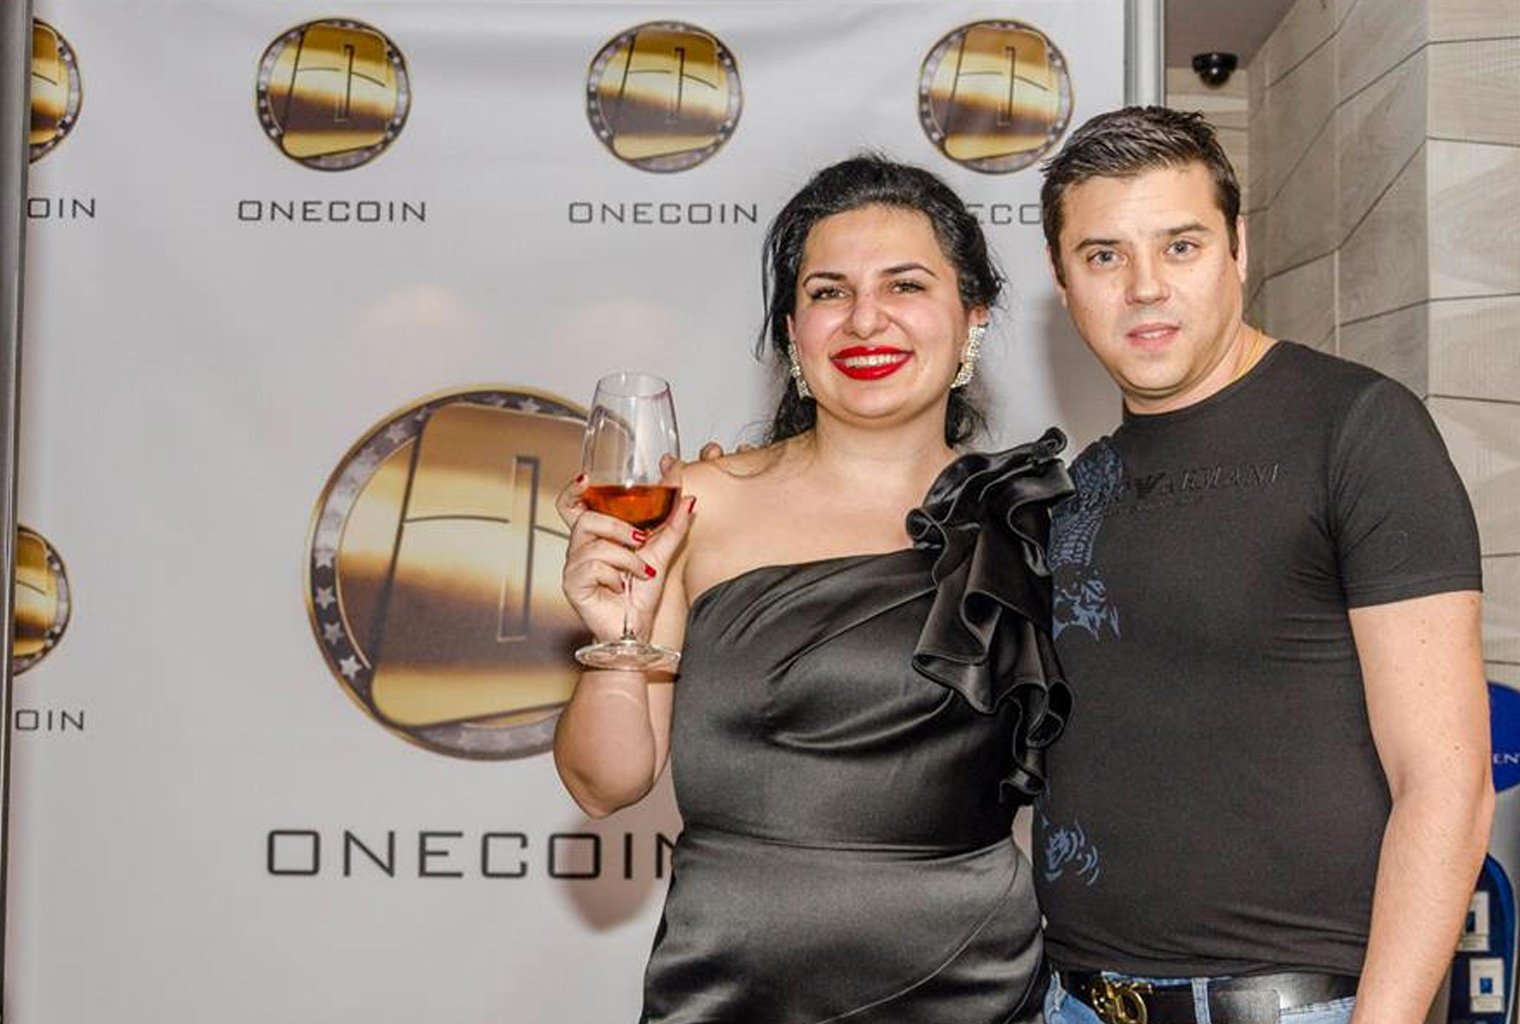 Charges of Fraudulent Pretense: US Court Unseals Onecoin Cofounder's Indictment